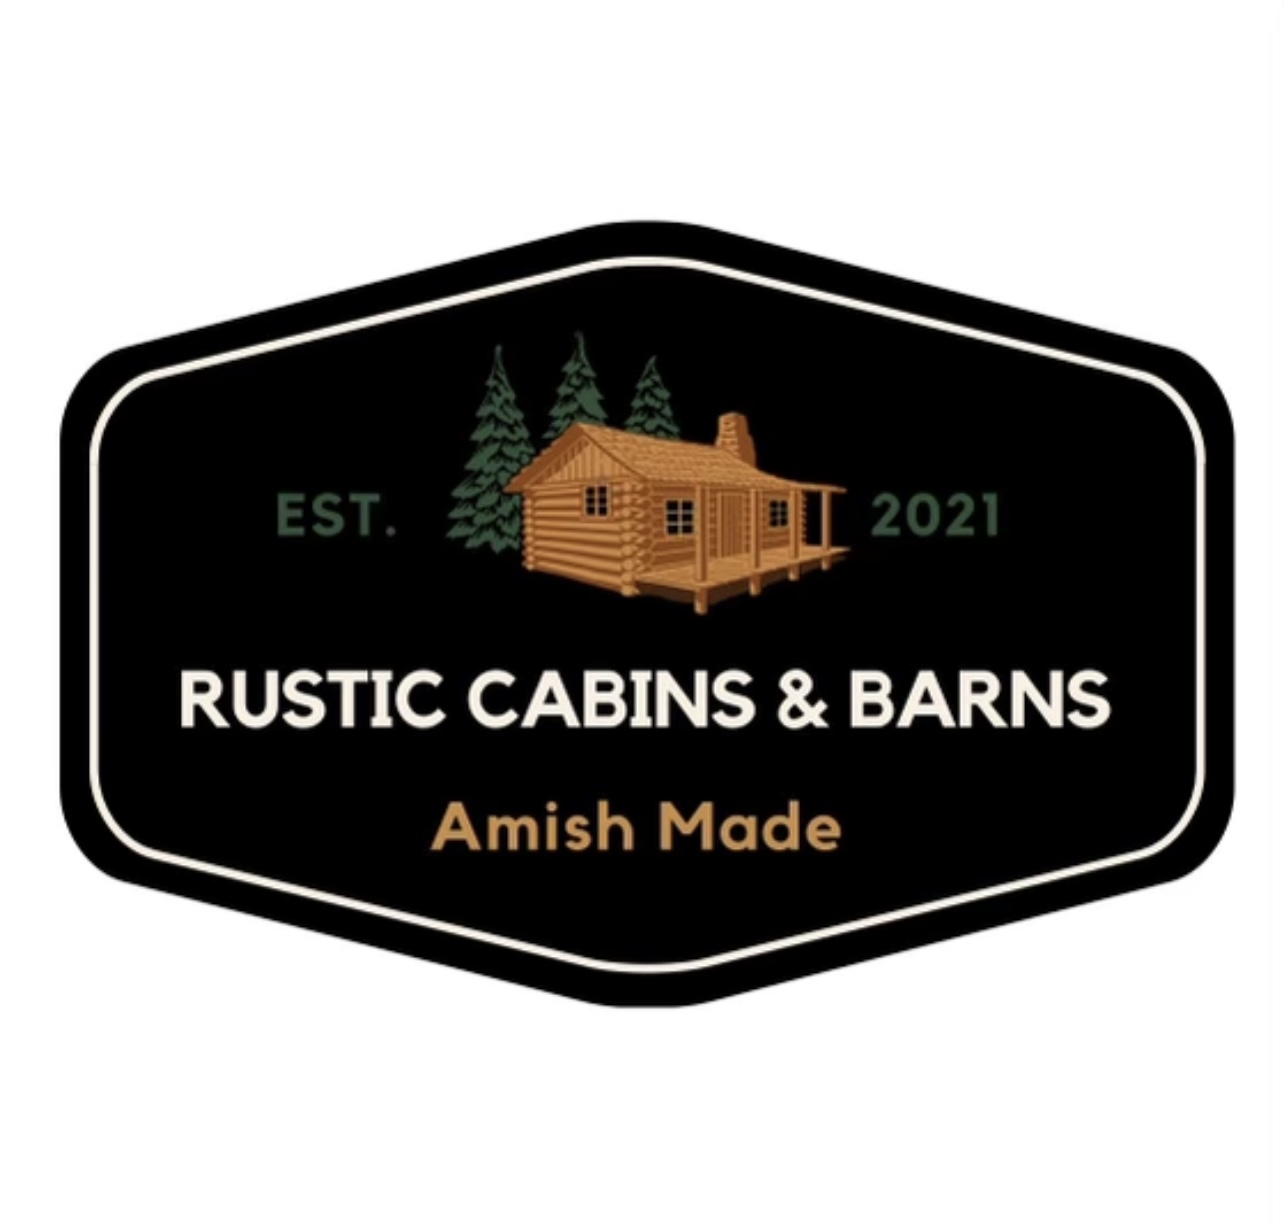 Company Logo with a Brown Cabin with Green Trees in the background.